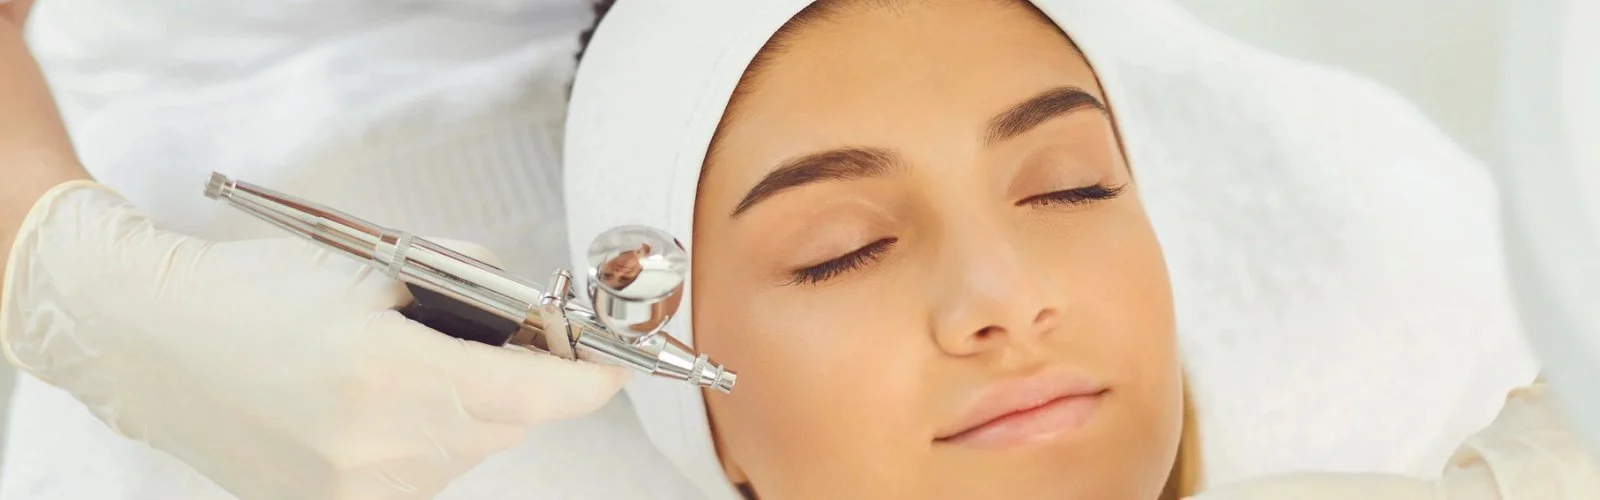 Chemical Peel Treatment After Skin Care Tips | Salon Dolce Vita